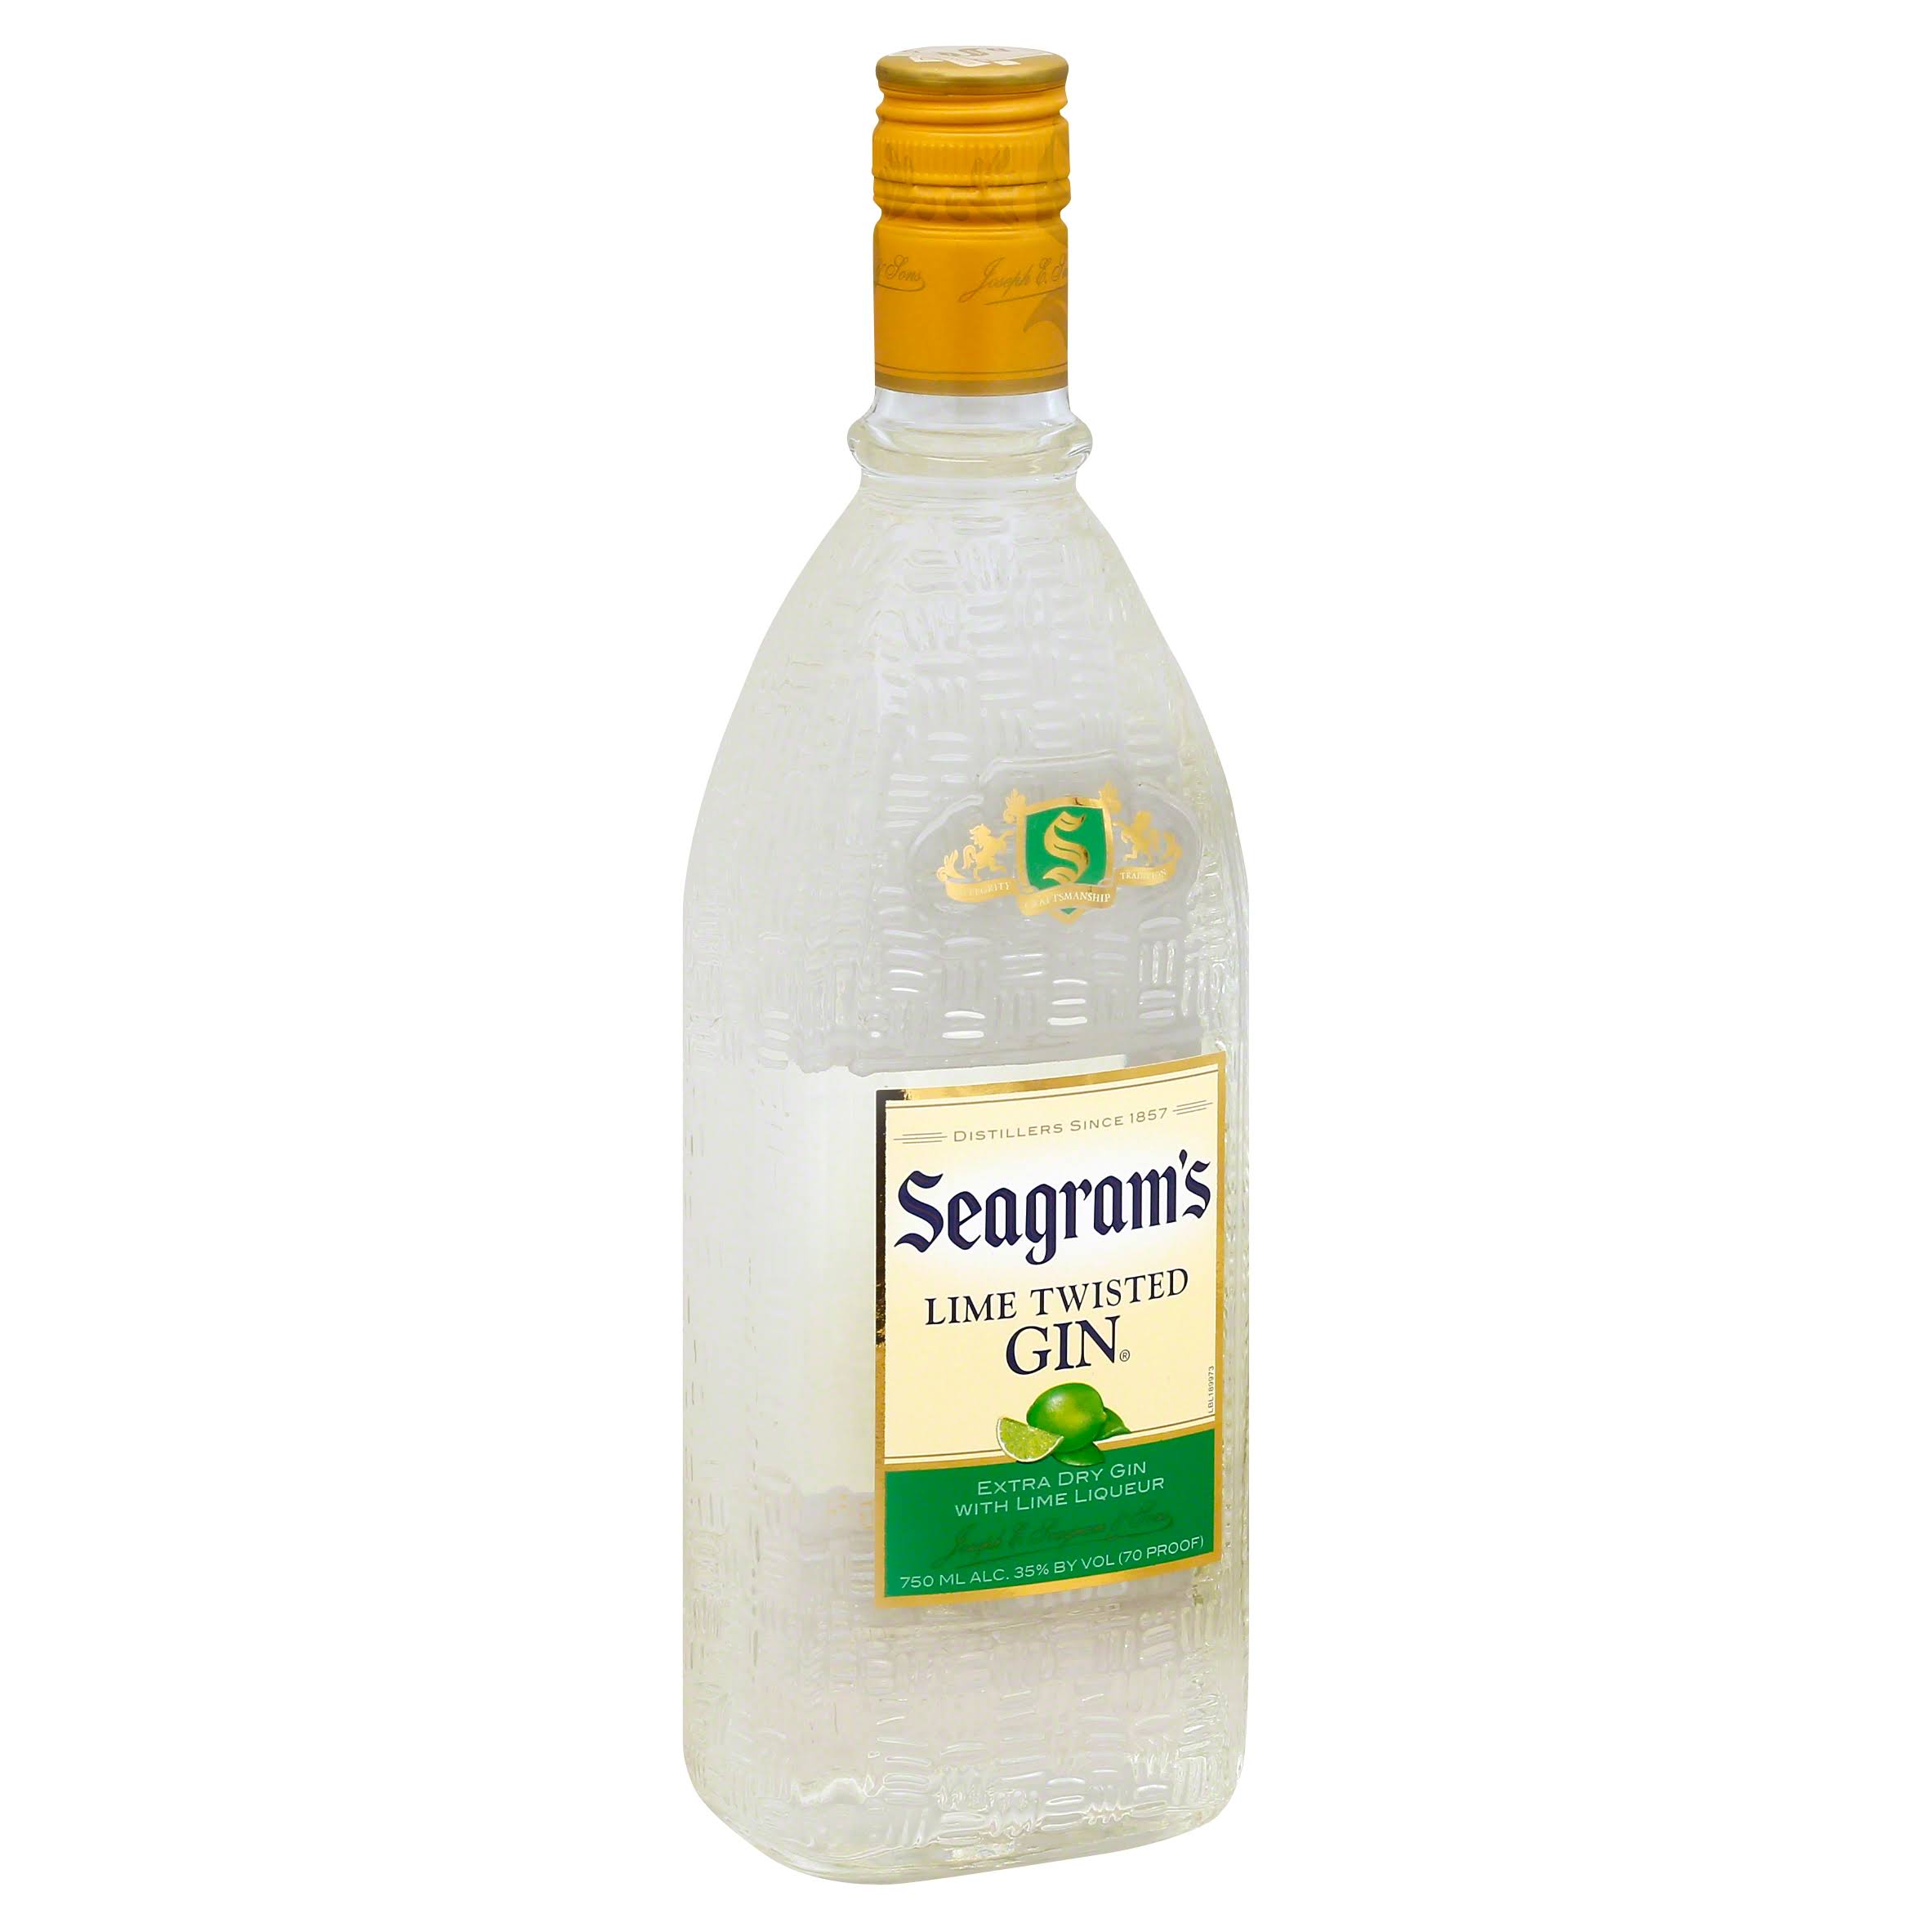 Seagram's Gin - Lime Twisted, 750ml